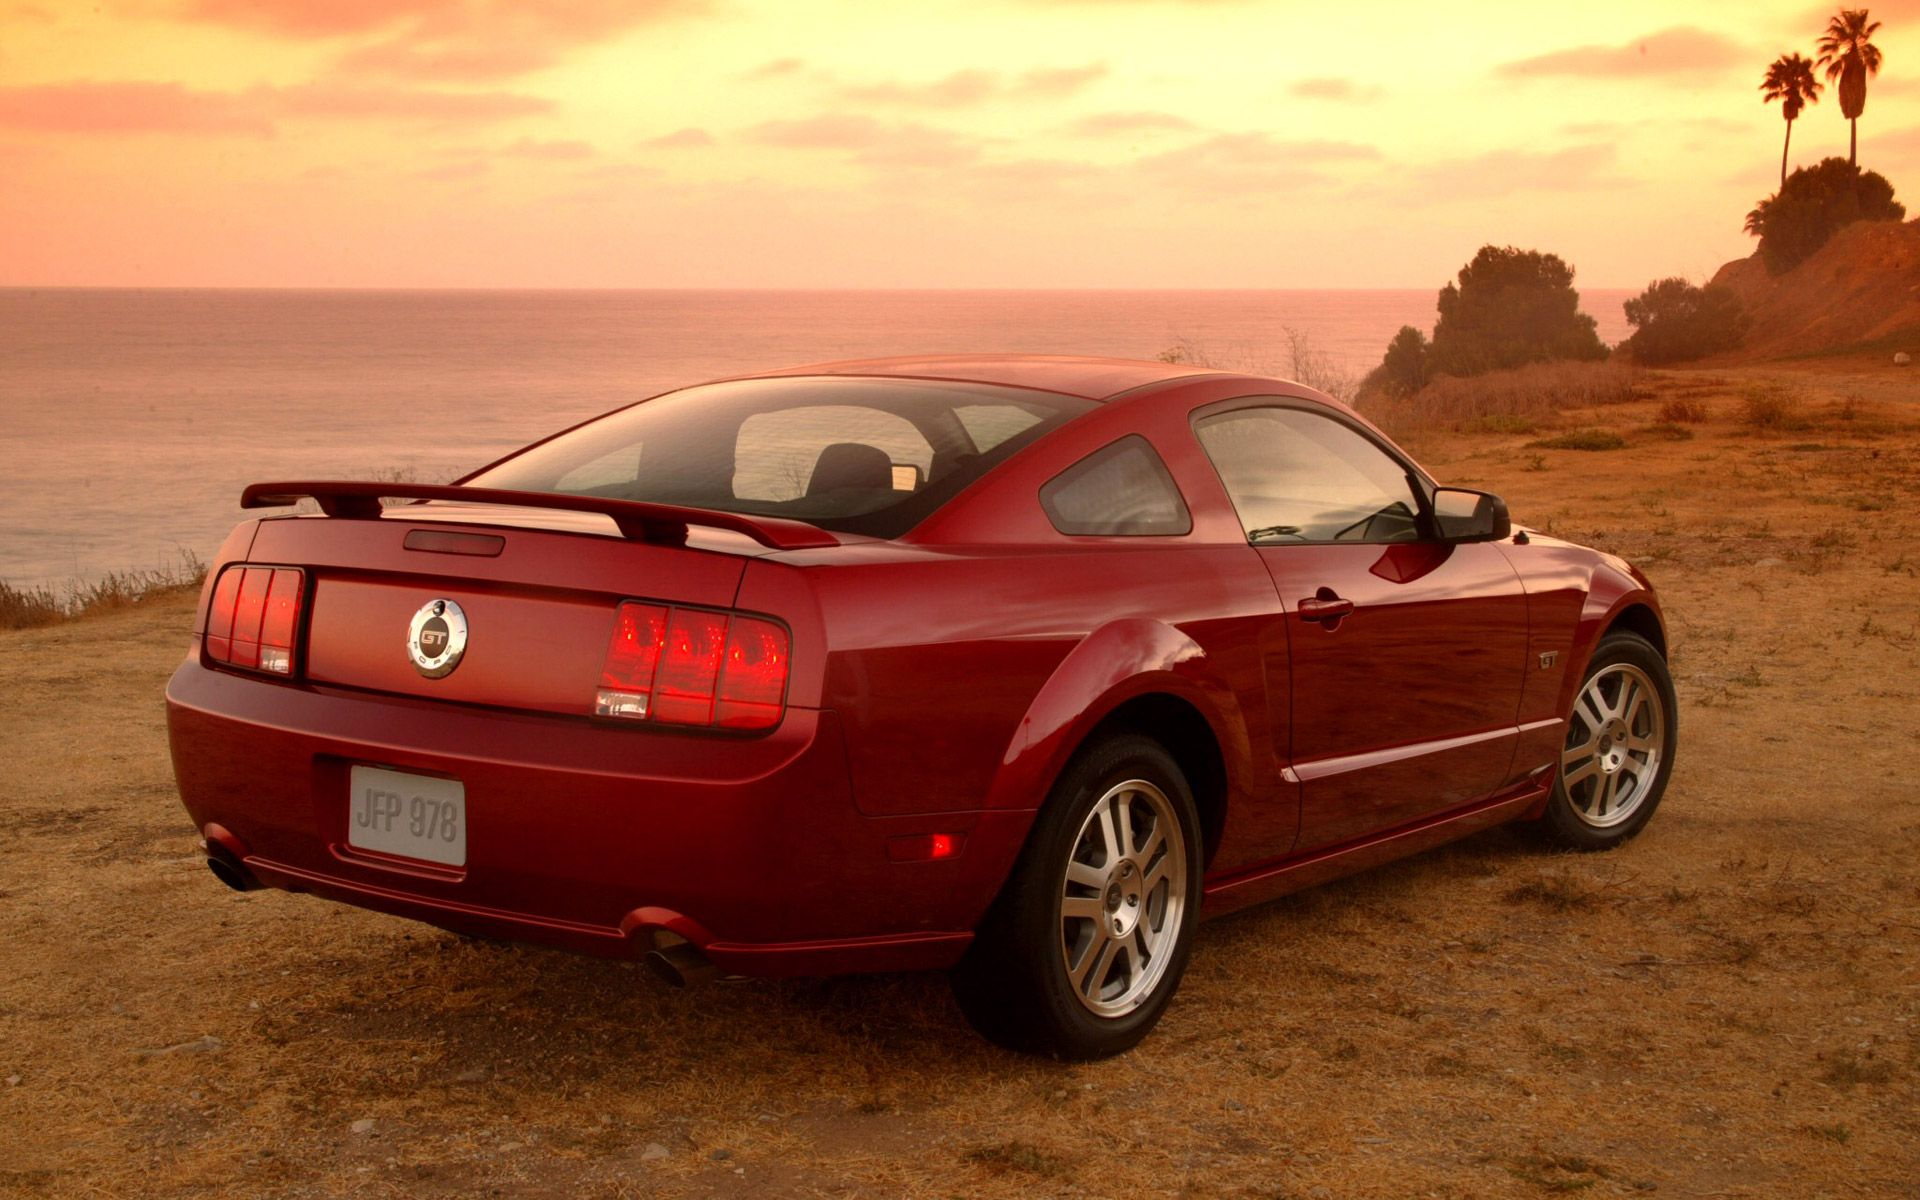 2005-Ford-Mustang-GT-004-1200